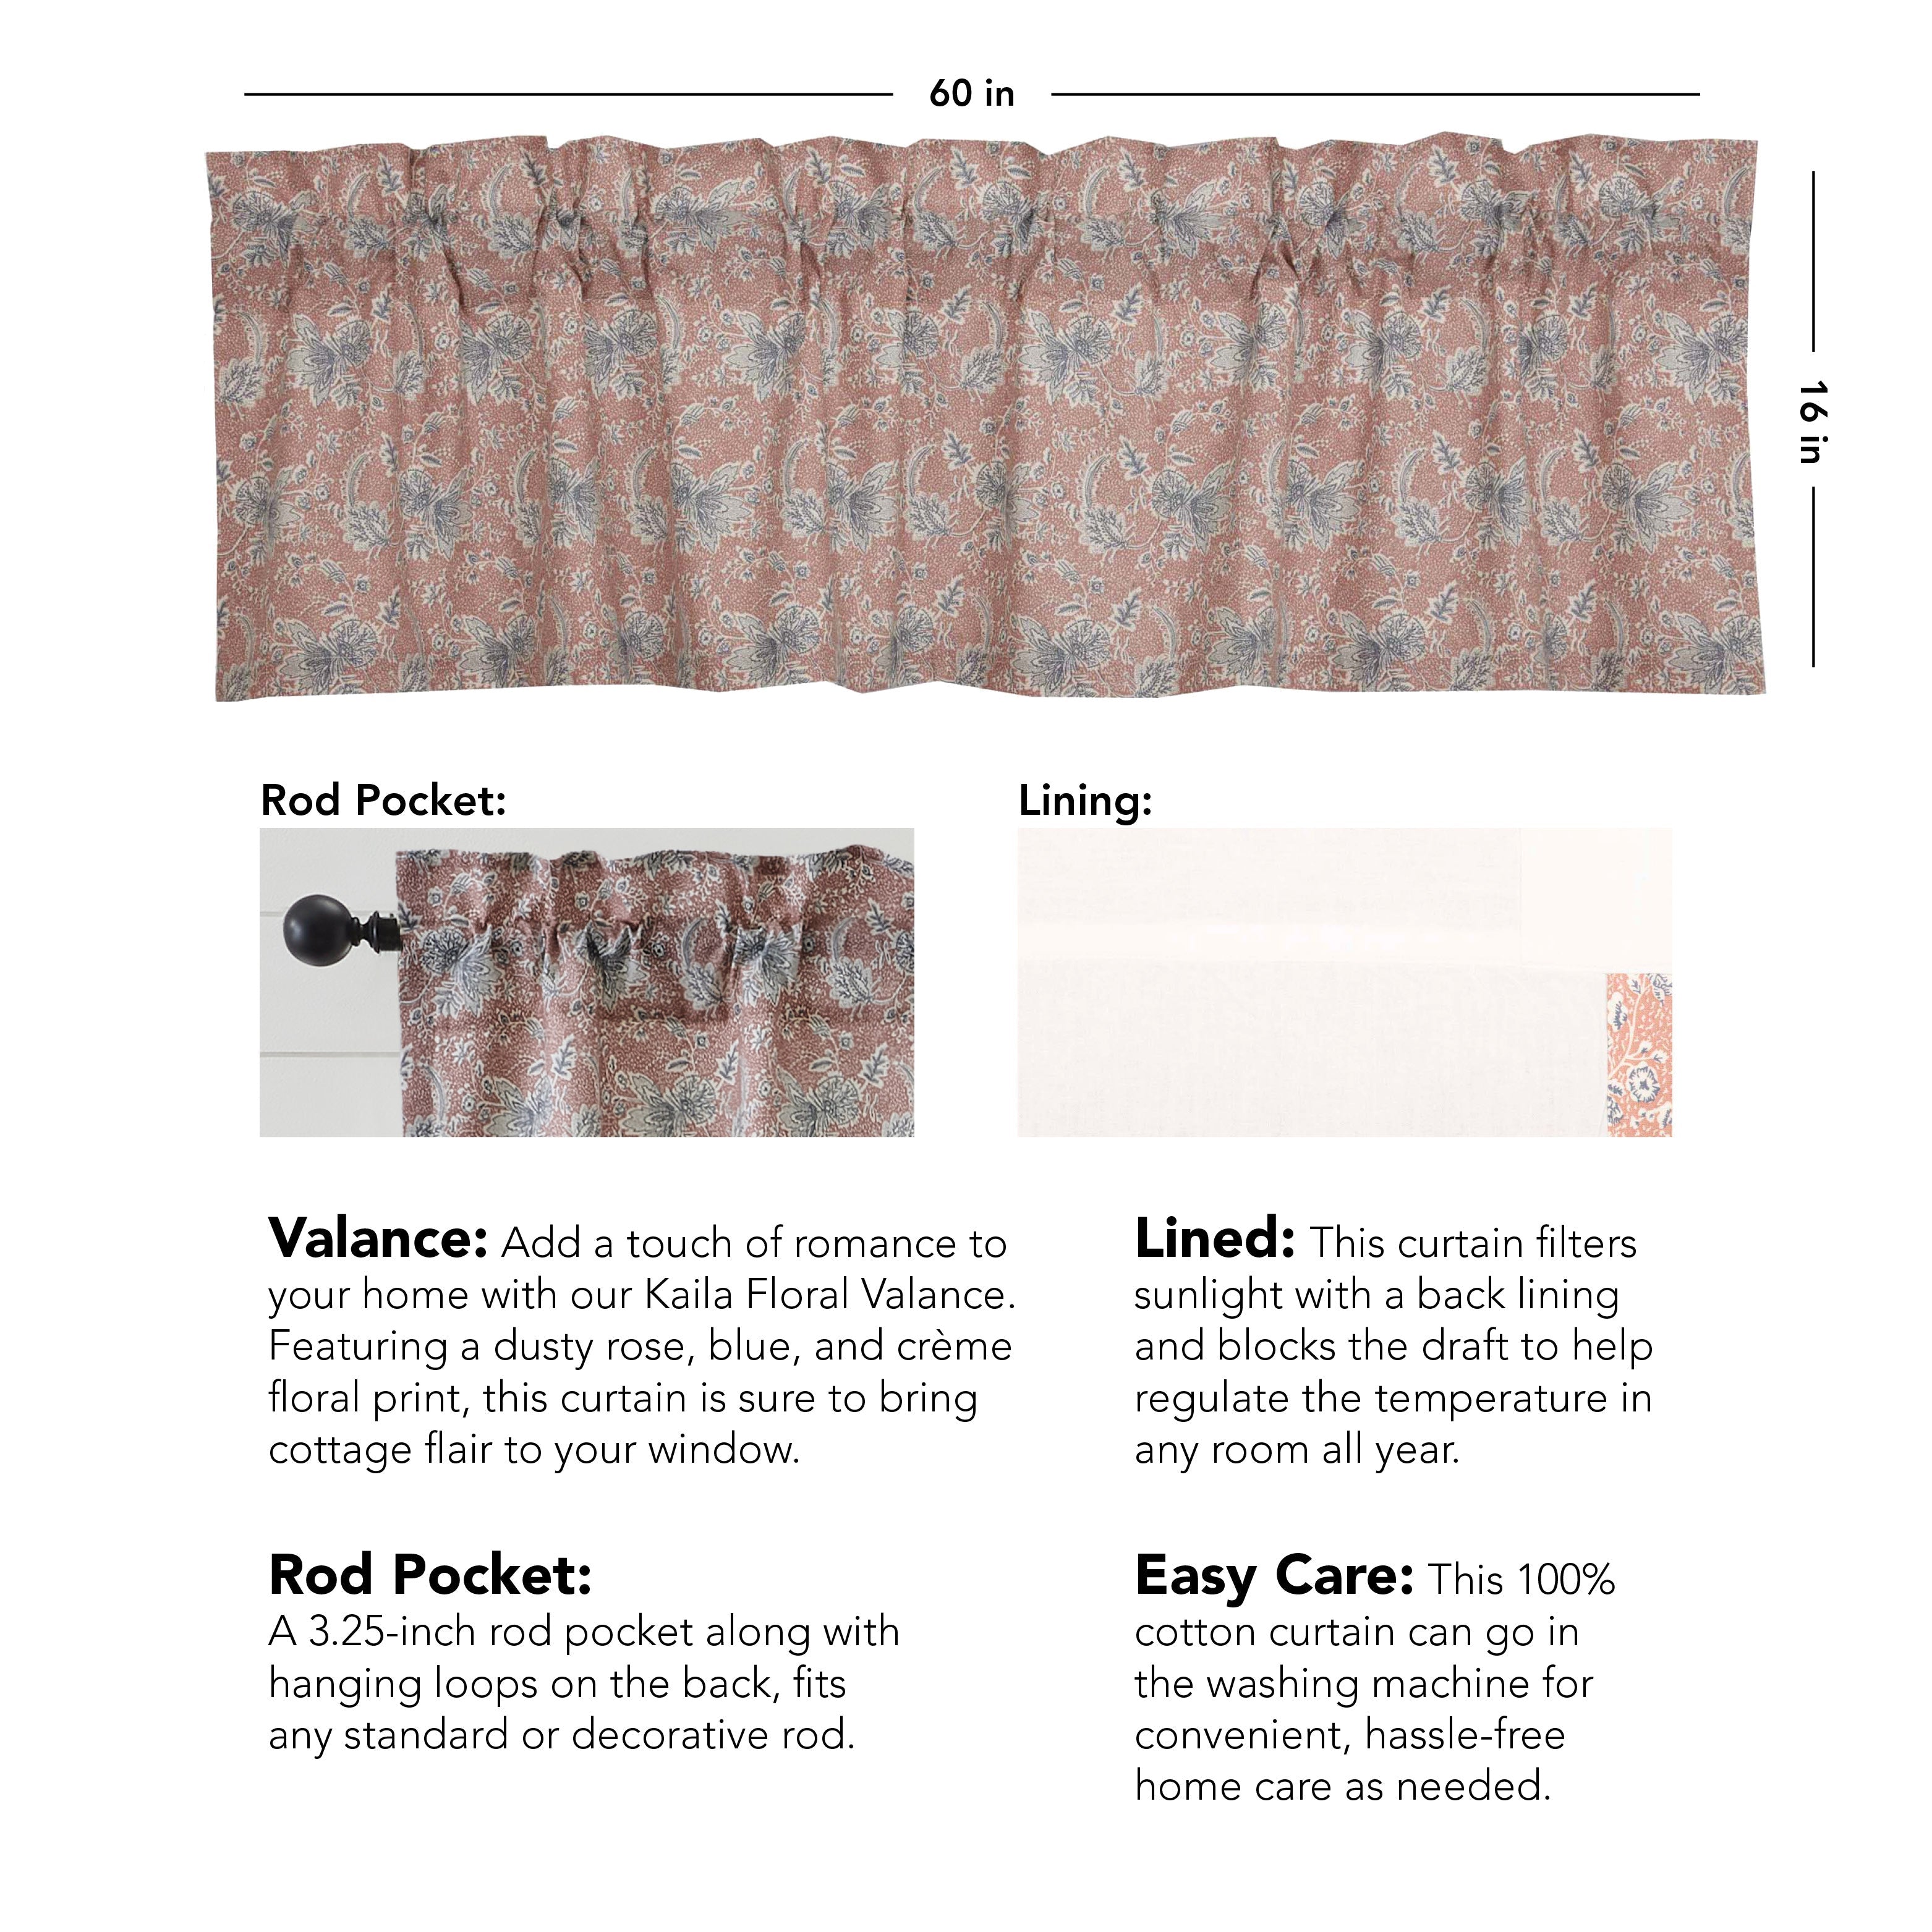 Kaila Floral Valance 16x60 VHC Brands